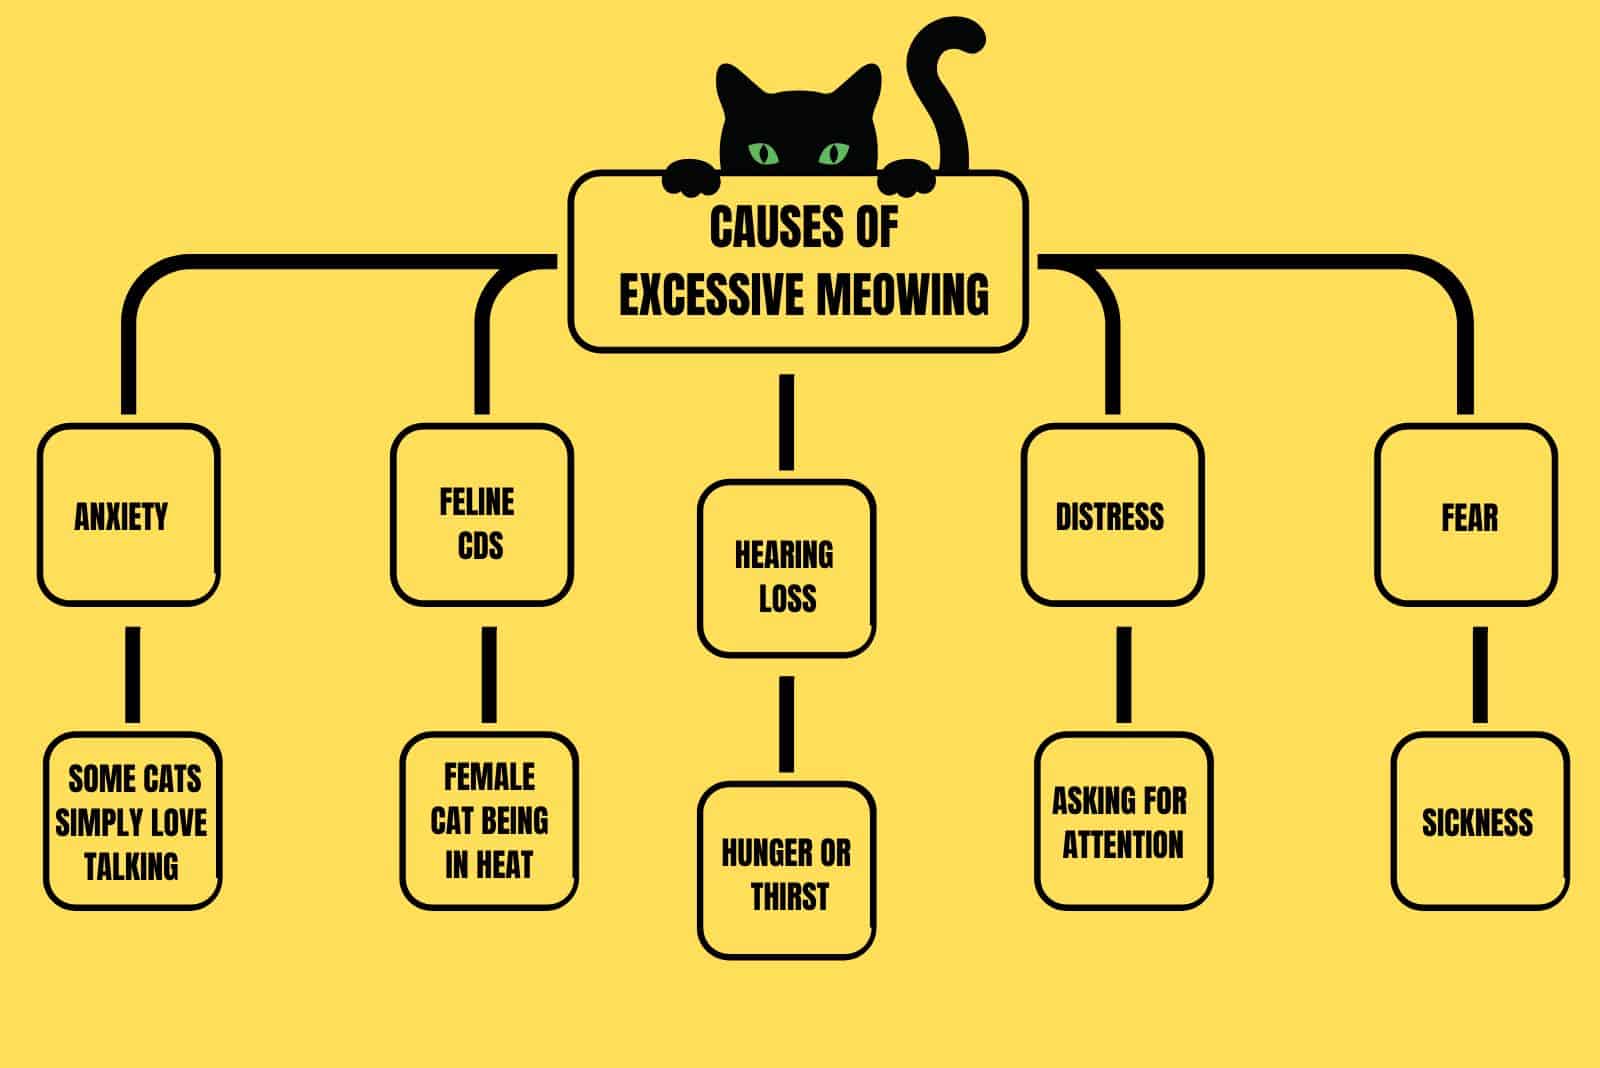 illustration with causes of excessive meowing